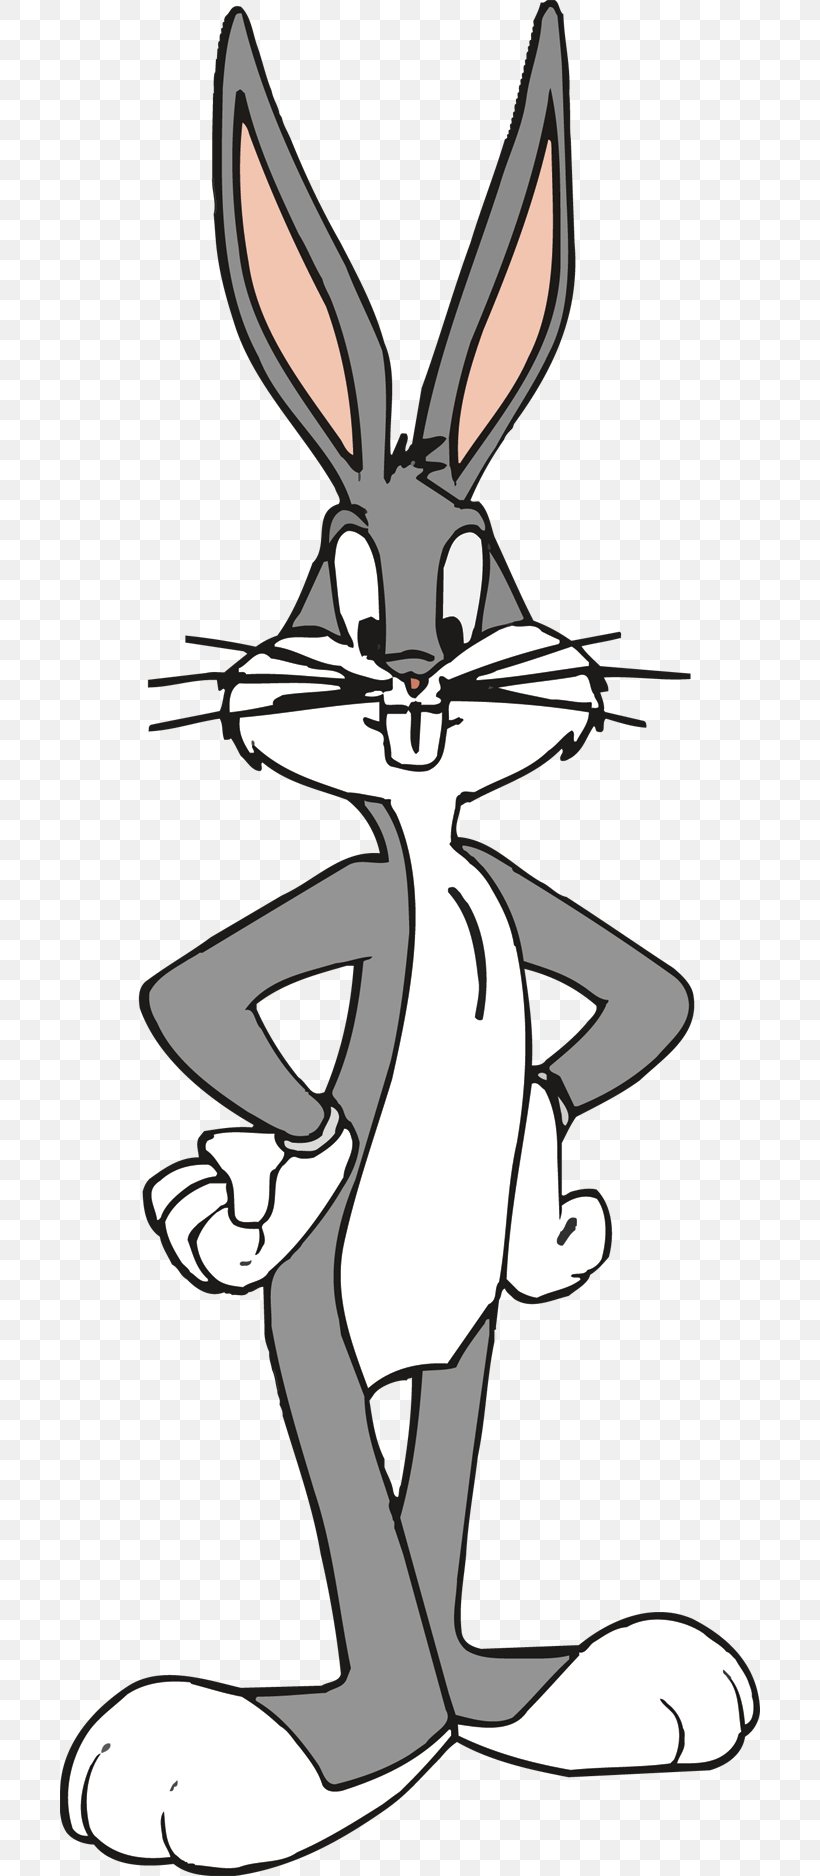 Bugs Bunny Porky Pig Cartoon Looney Tunes Clip Art, PNG, 700x1876px, Bugs Bunny, Animated Cartoon, Art, Artwork, Black And White Download Free